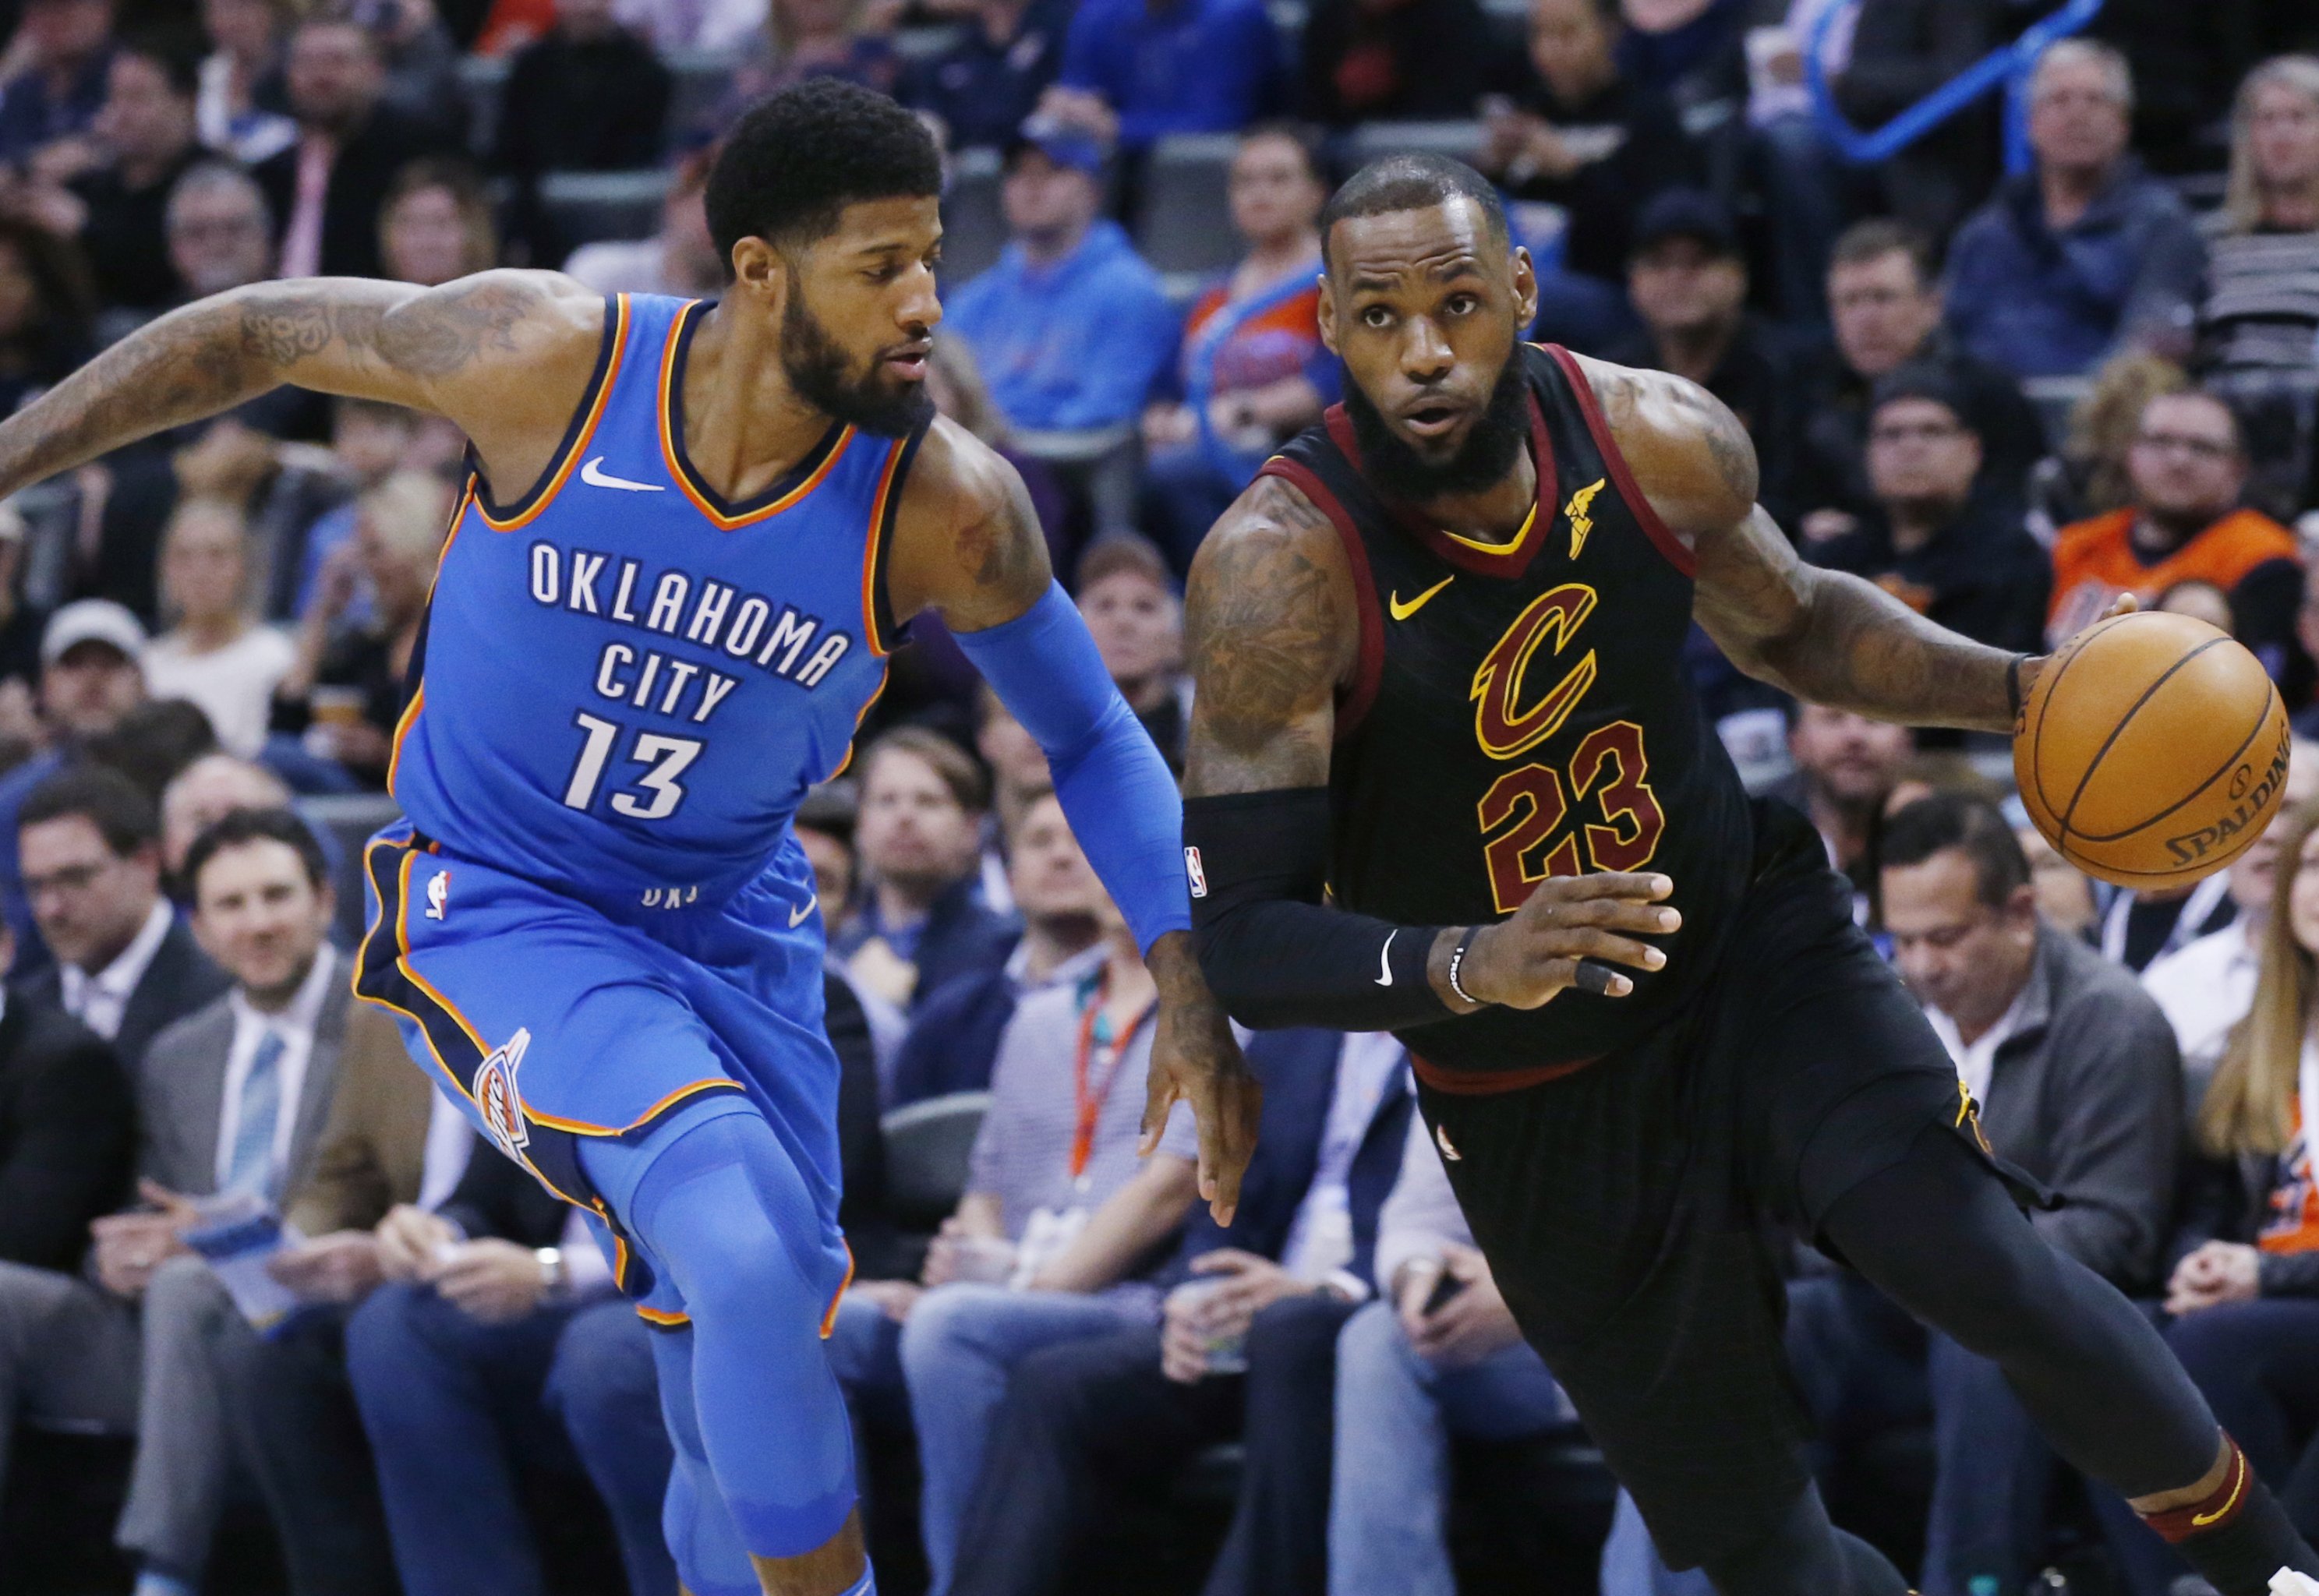 Pressure is on as James Harden saddles in next to another All-Star